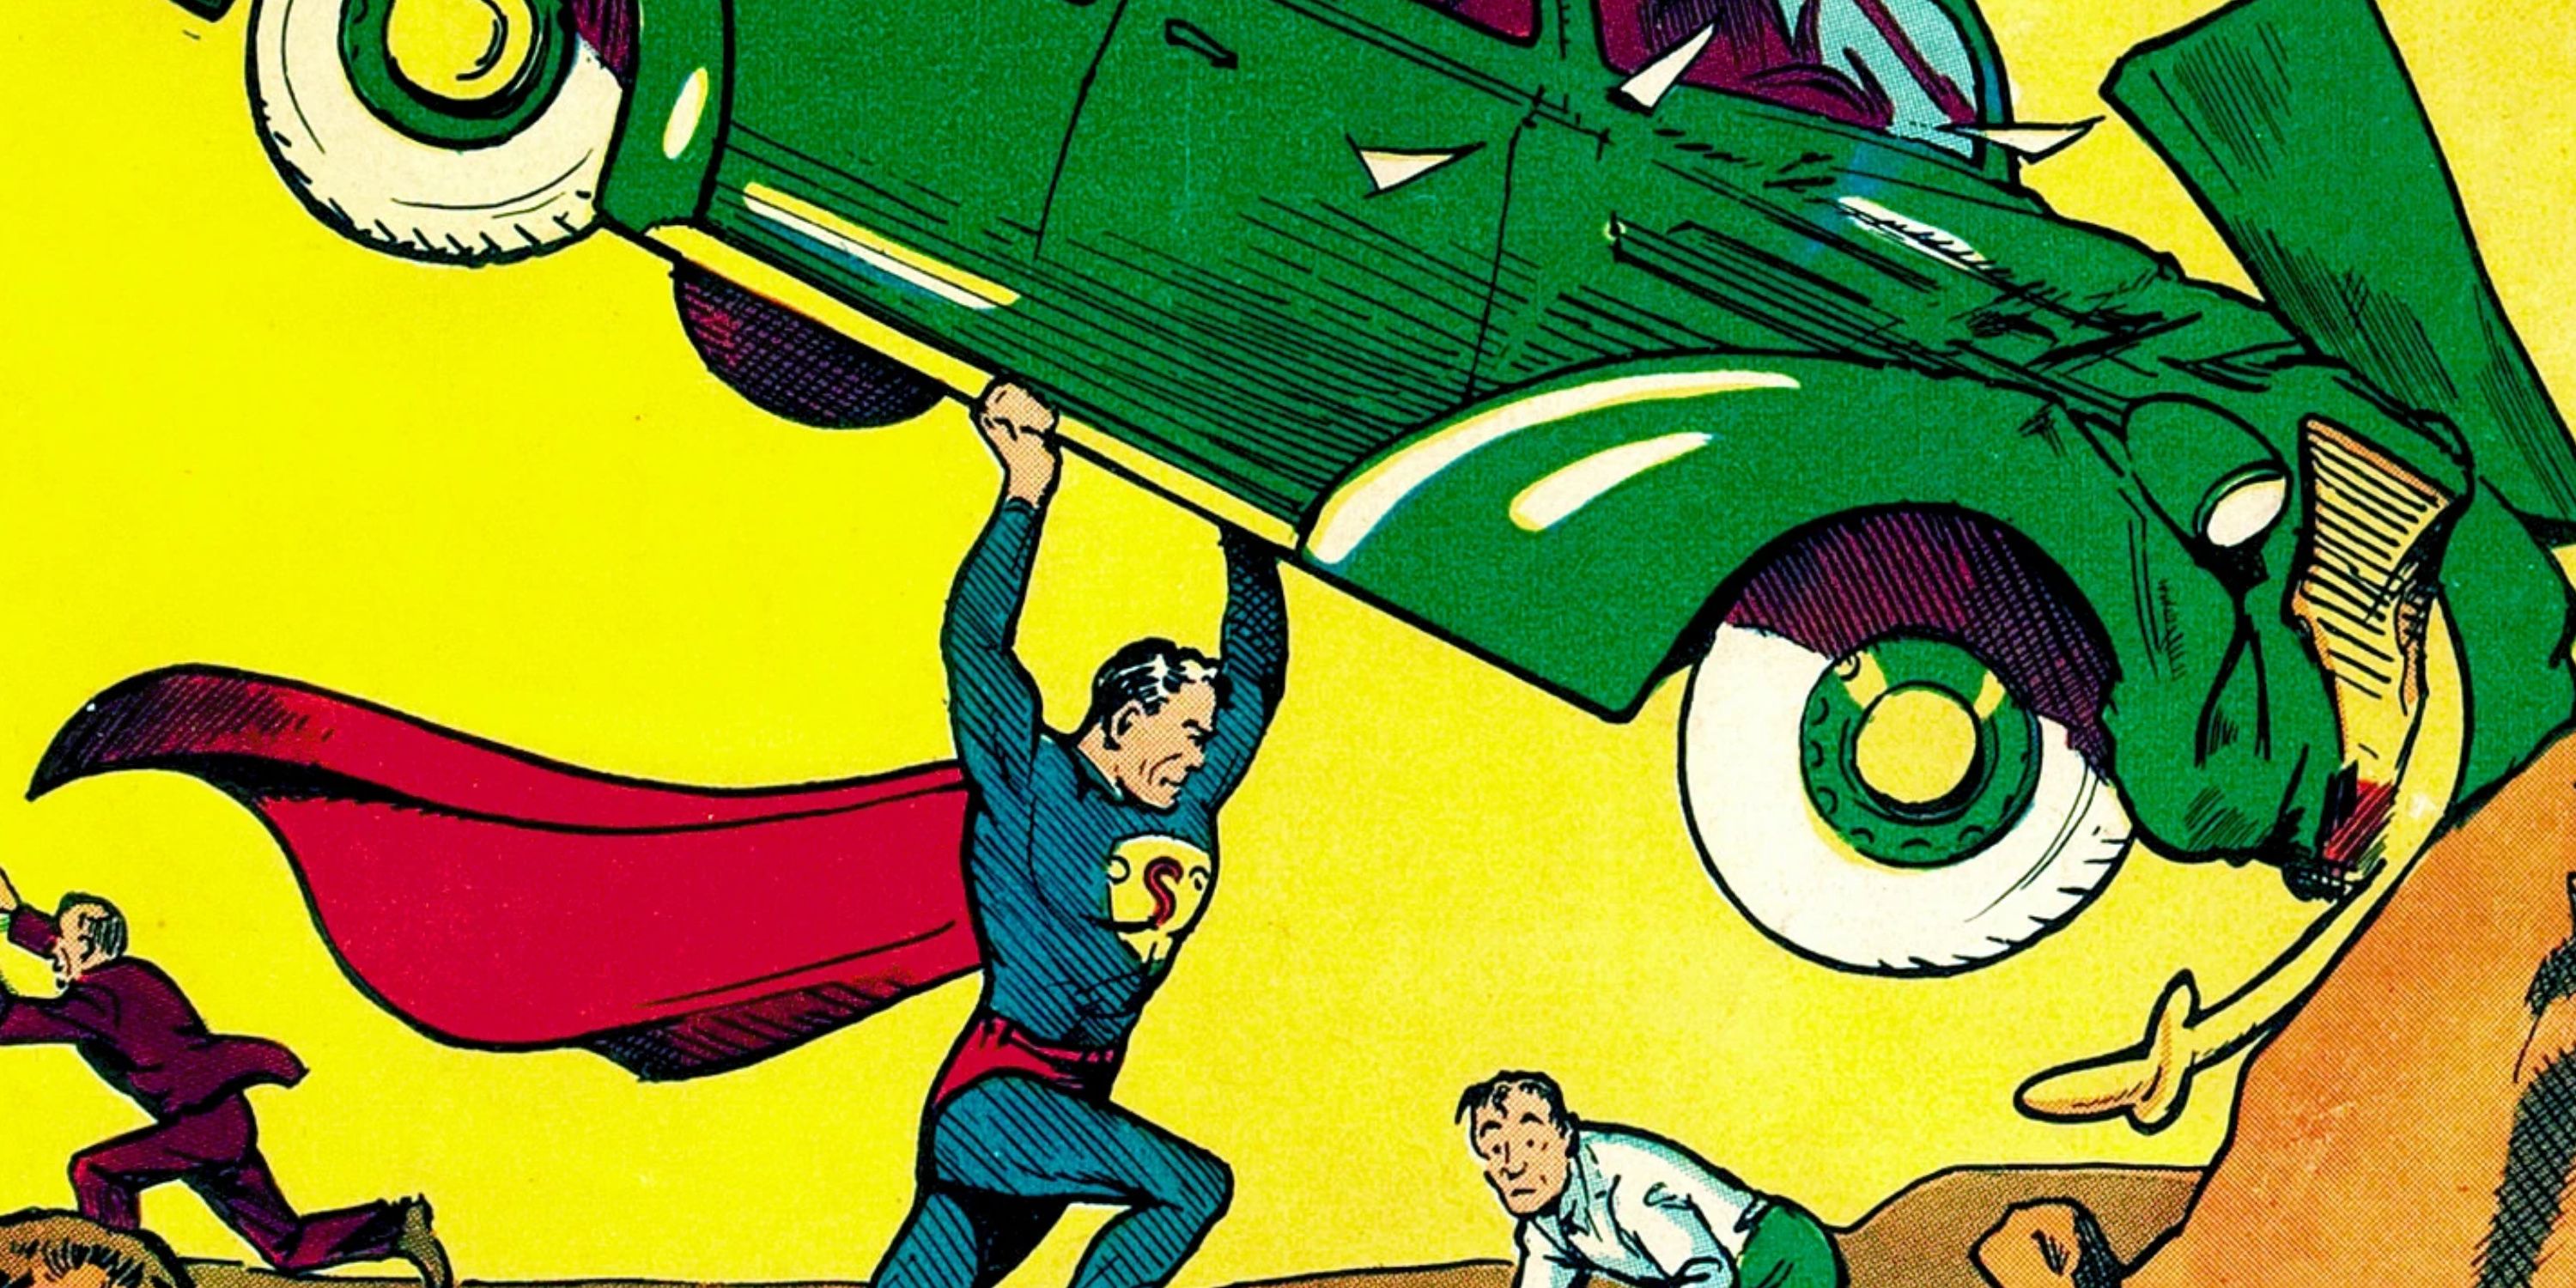 Superman lifting a car above his head and smashing it in DC Comics Action Comics 1